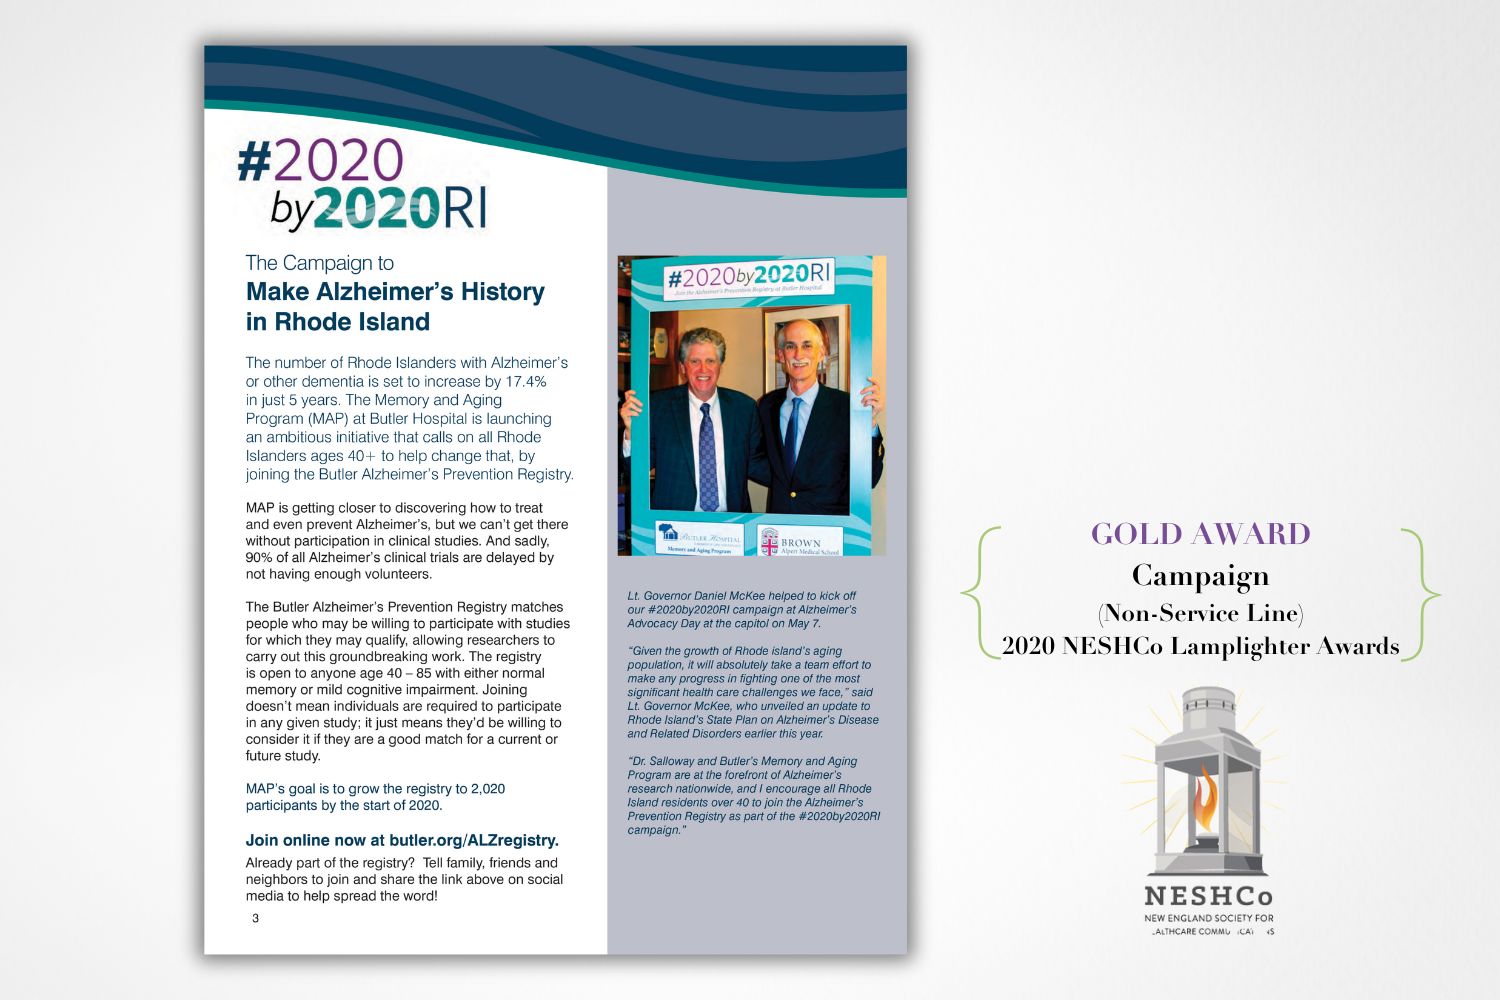 Image of magazine page titled "#2020by2020RI - The Campaign to Make Alzheimer's History in Rhode Island"